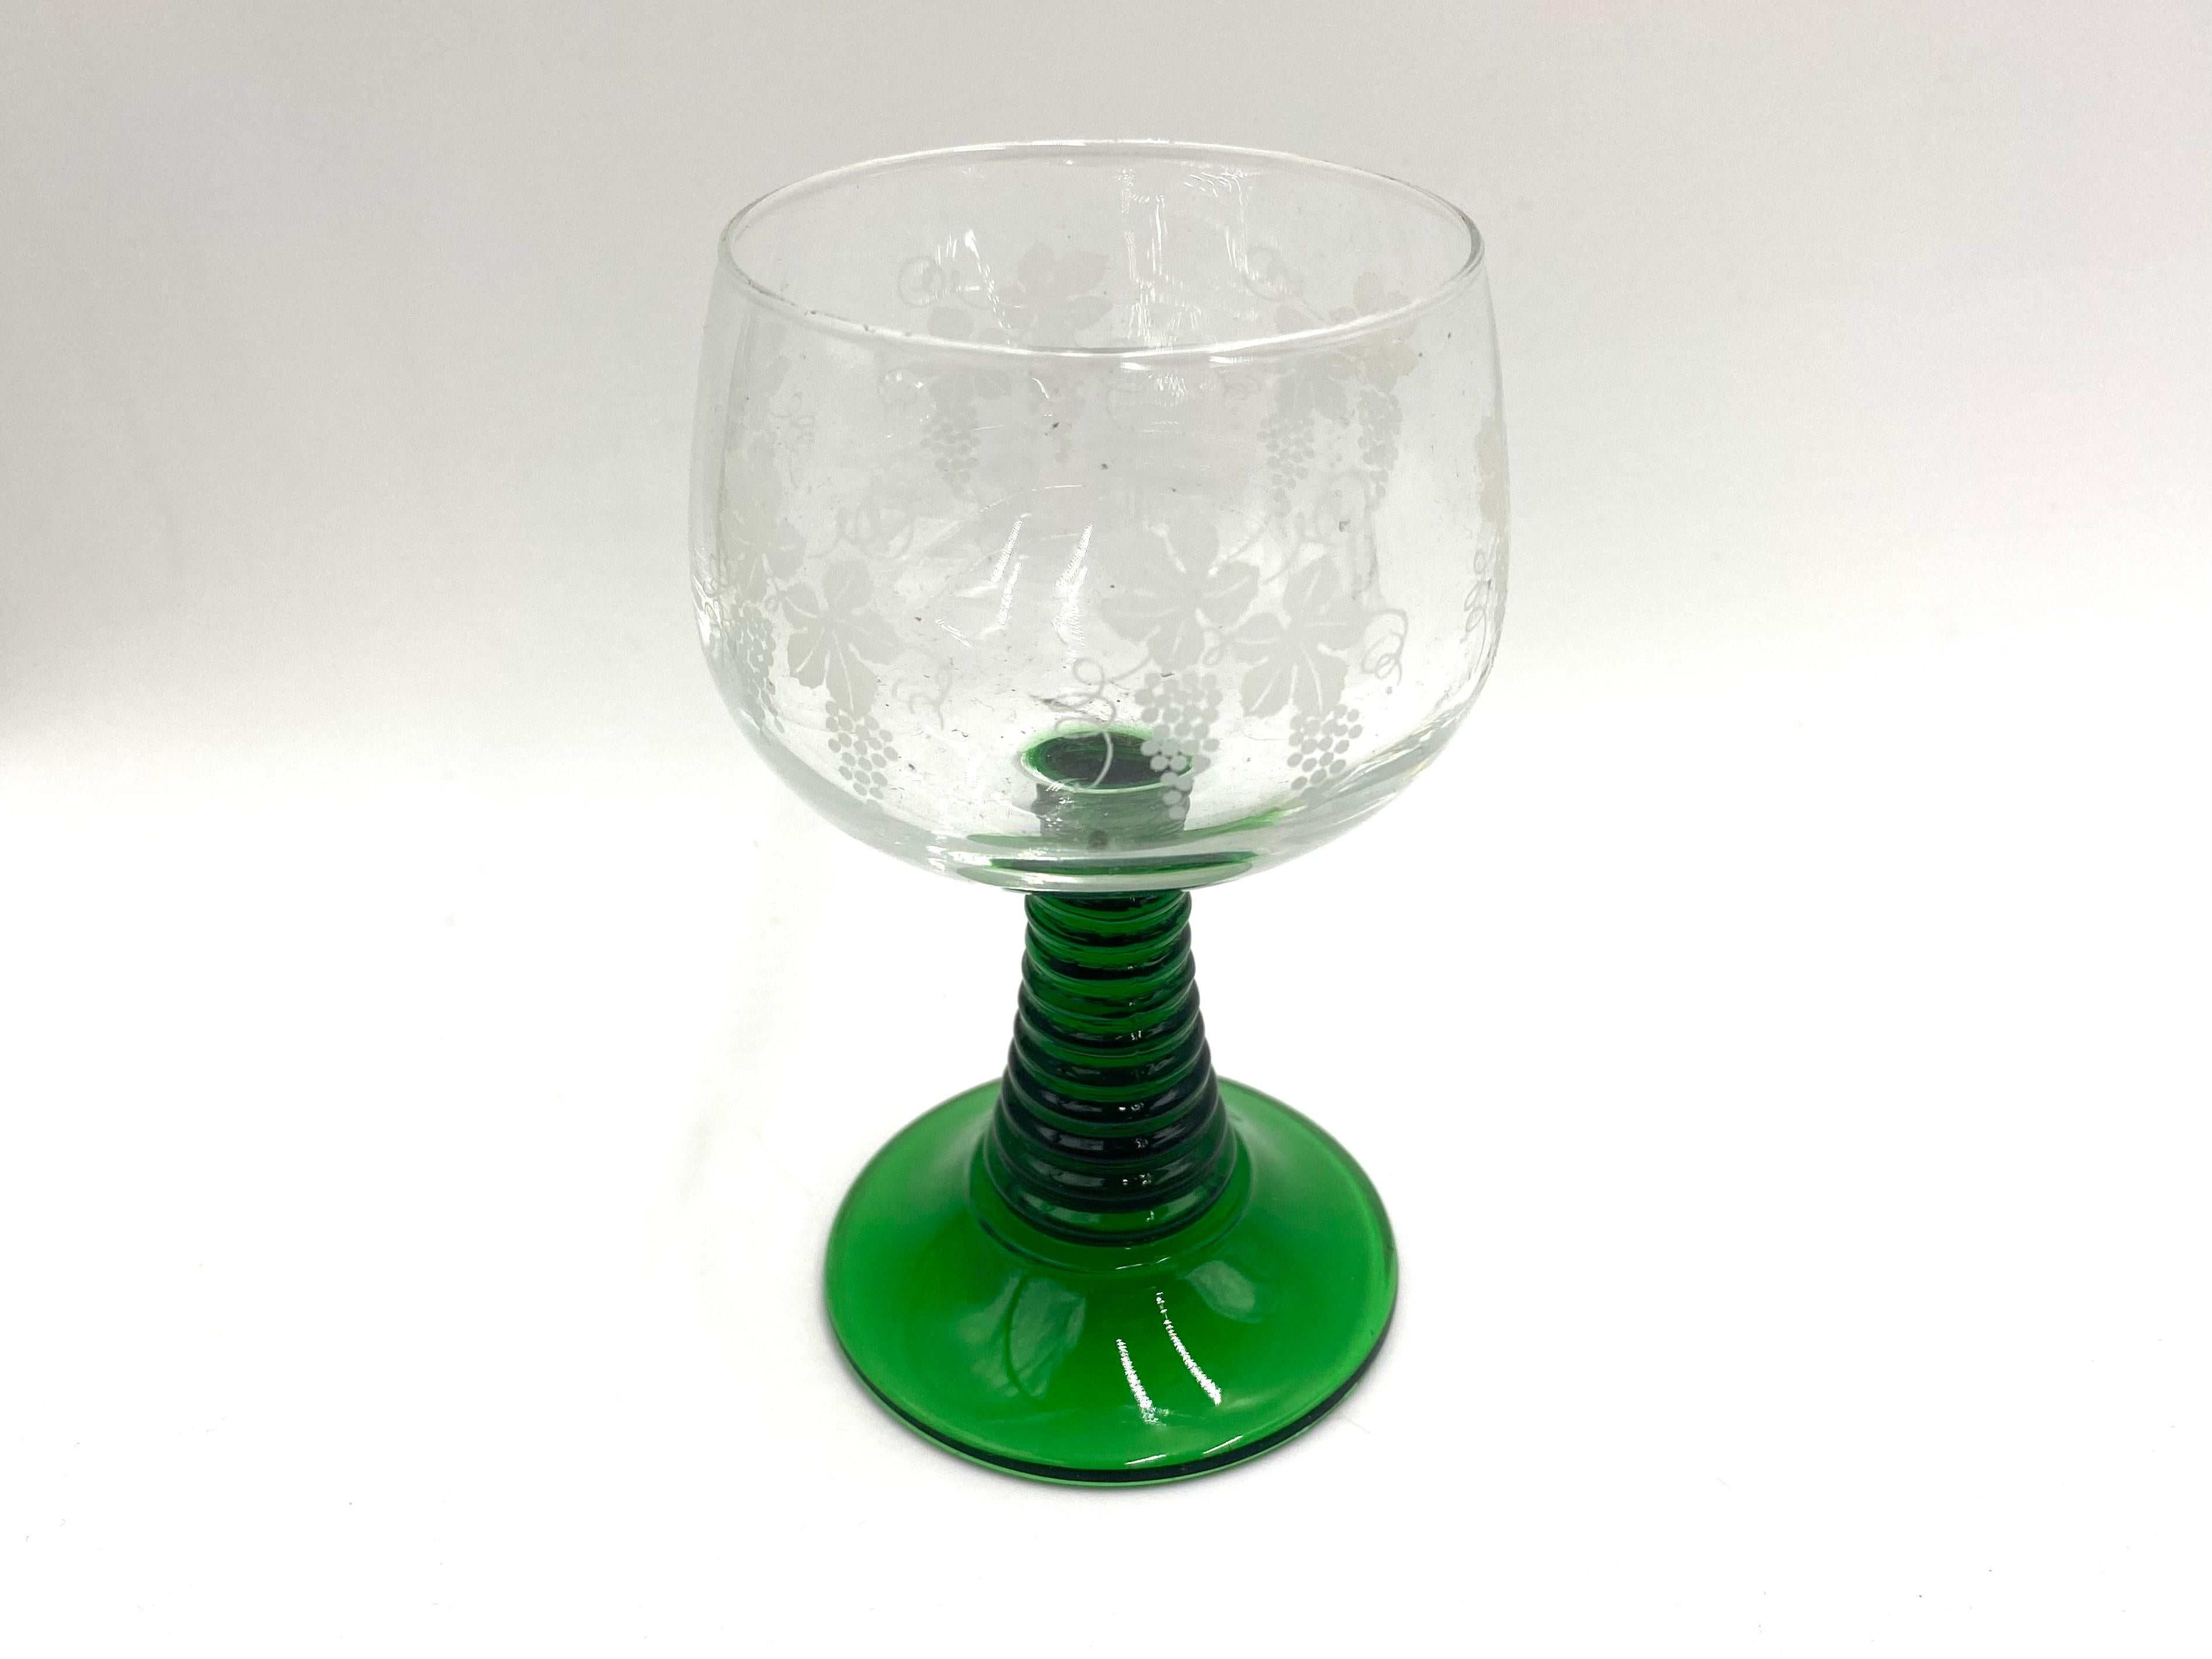 French Glasses on a Green Stem, France, Mid-20th Century